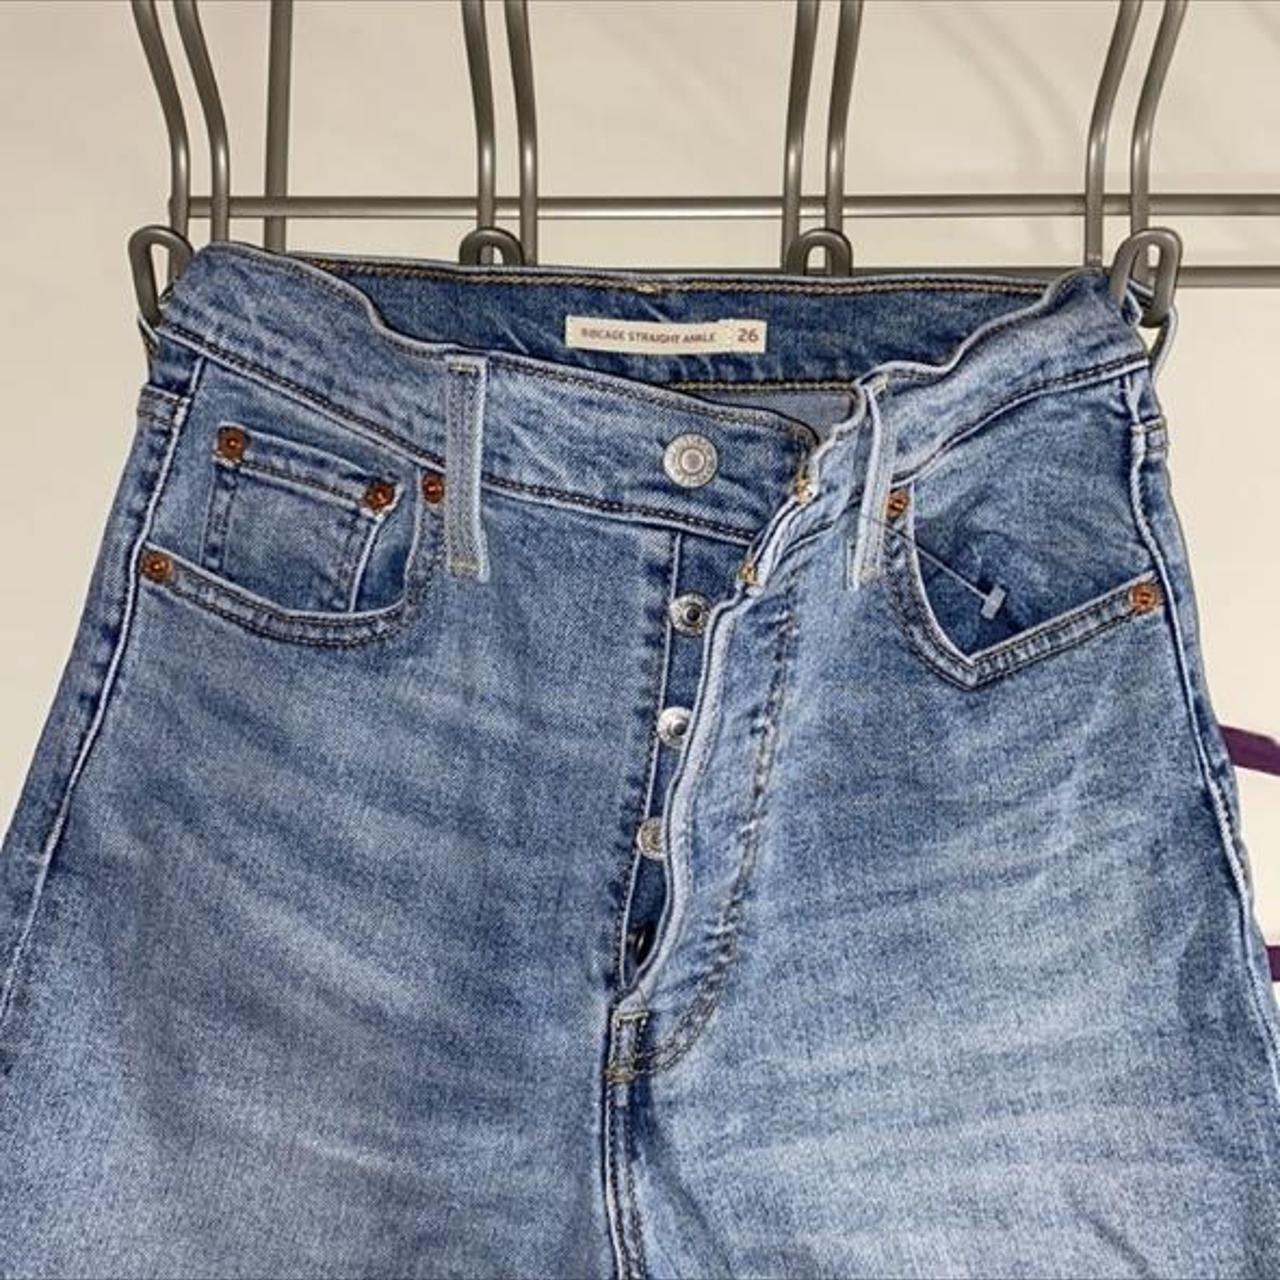 Levi’s rib cage straight ankle jeans -size 26, high... - Depop